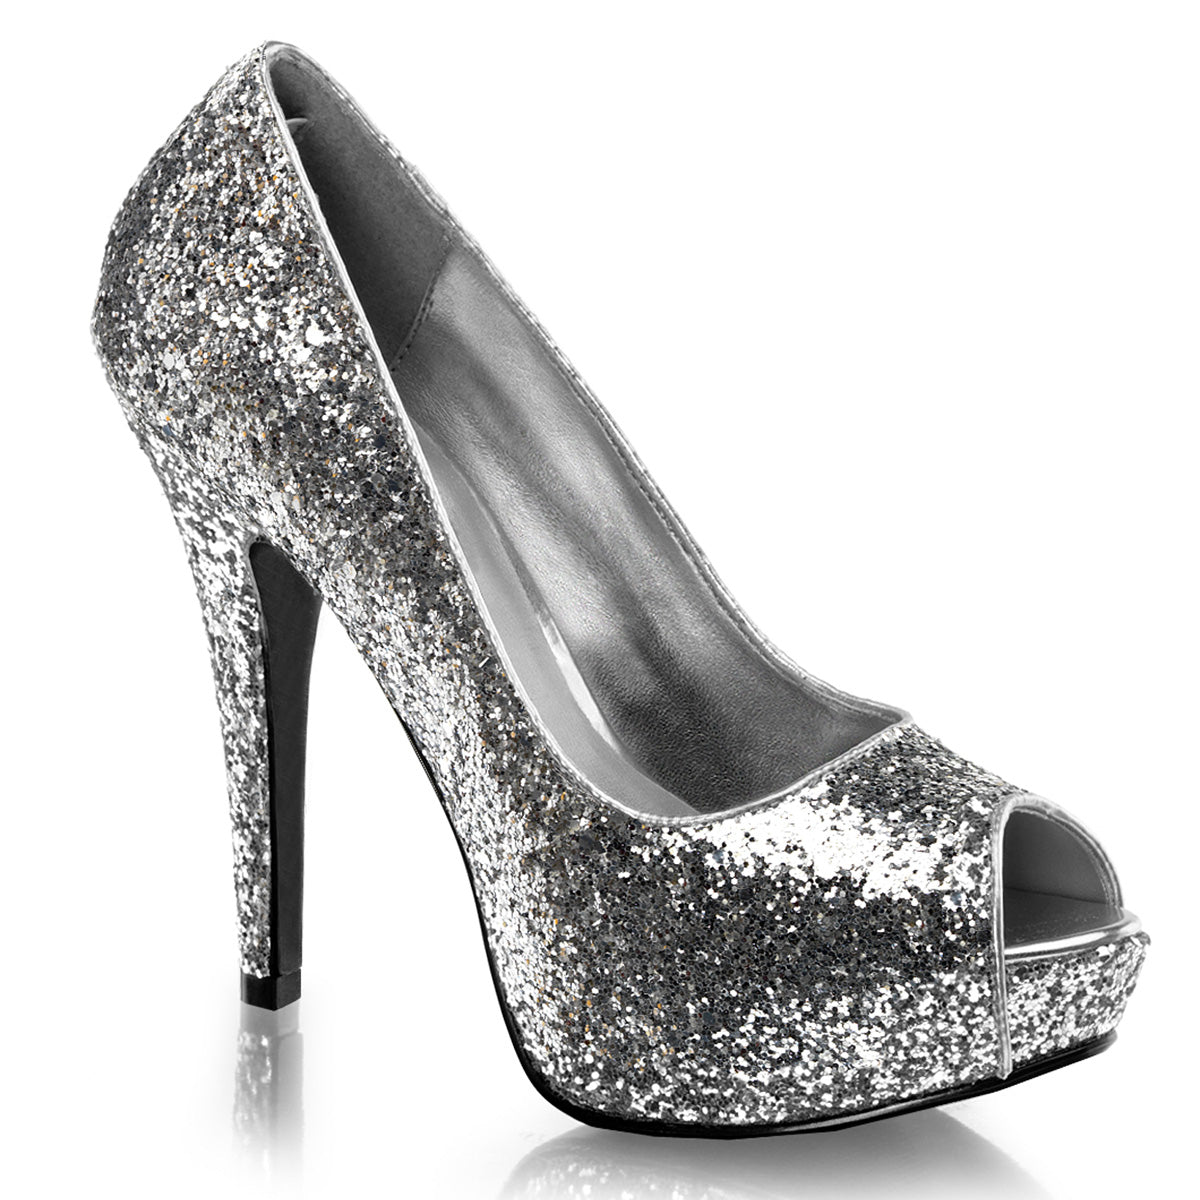 TWINKLE-18G Fabulicious 5 Inch Heel Silver Glitter Sexy Shoe-Fabulicious- Sexy Shoes